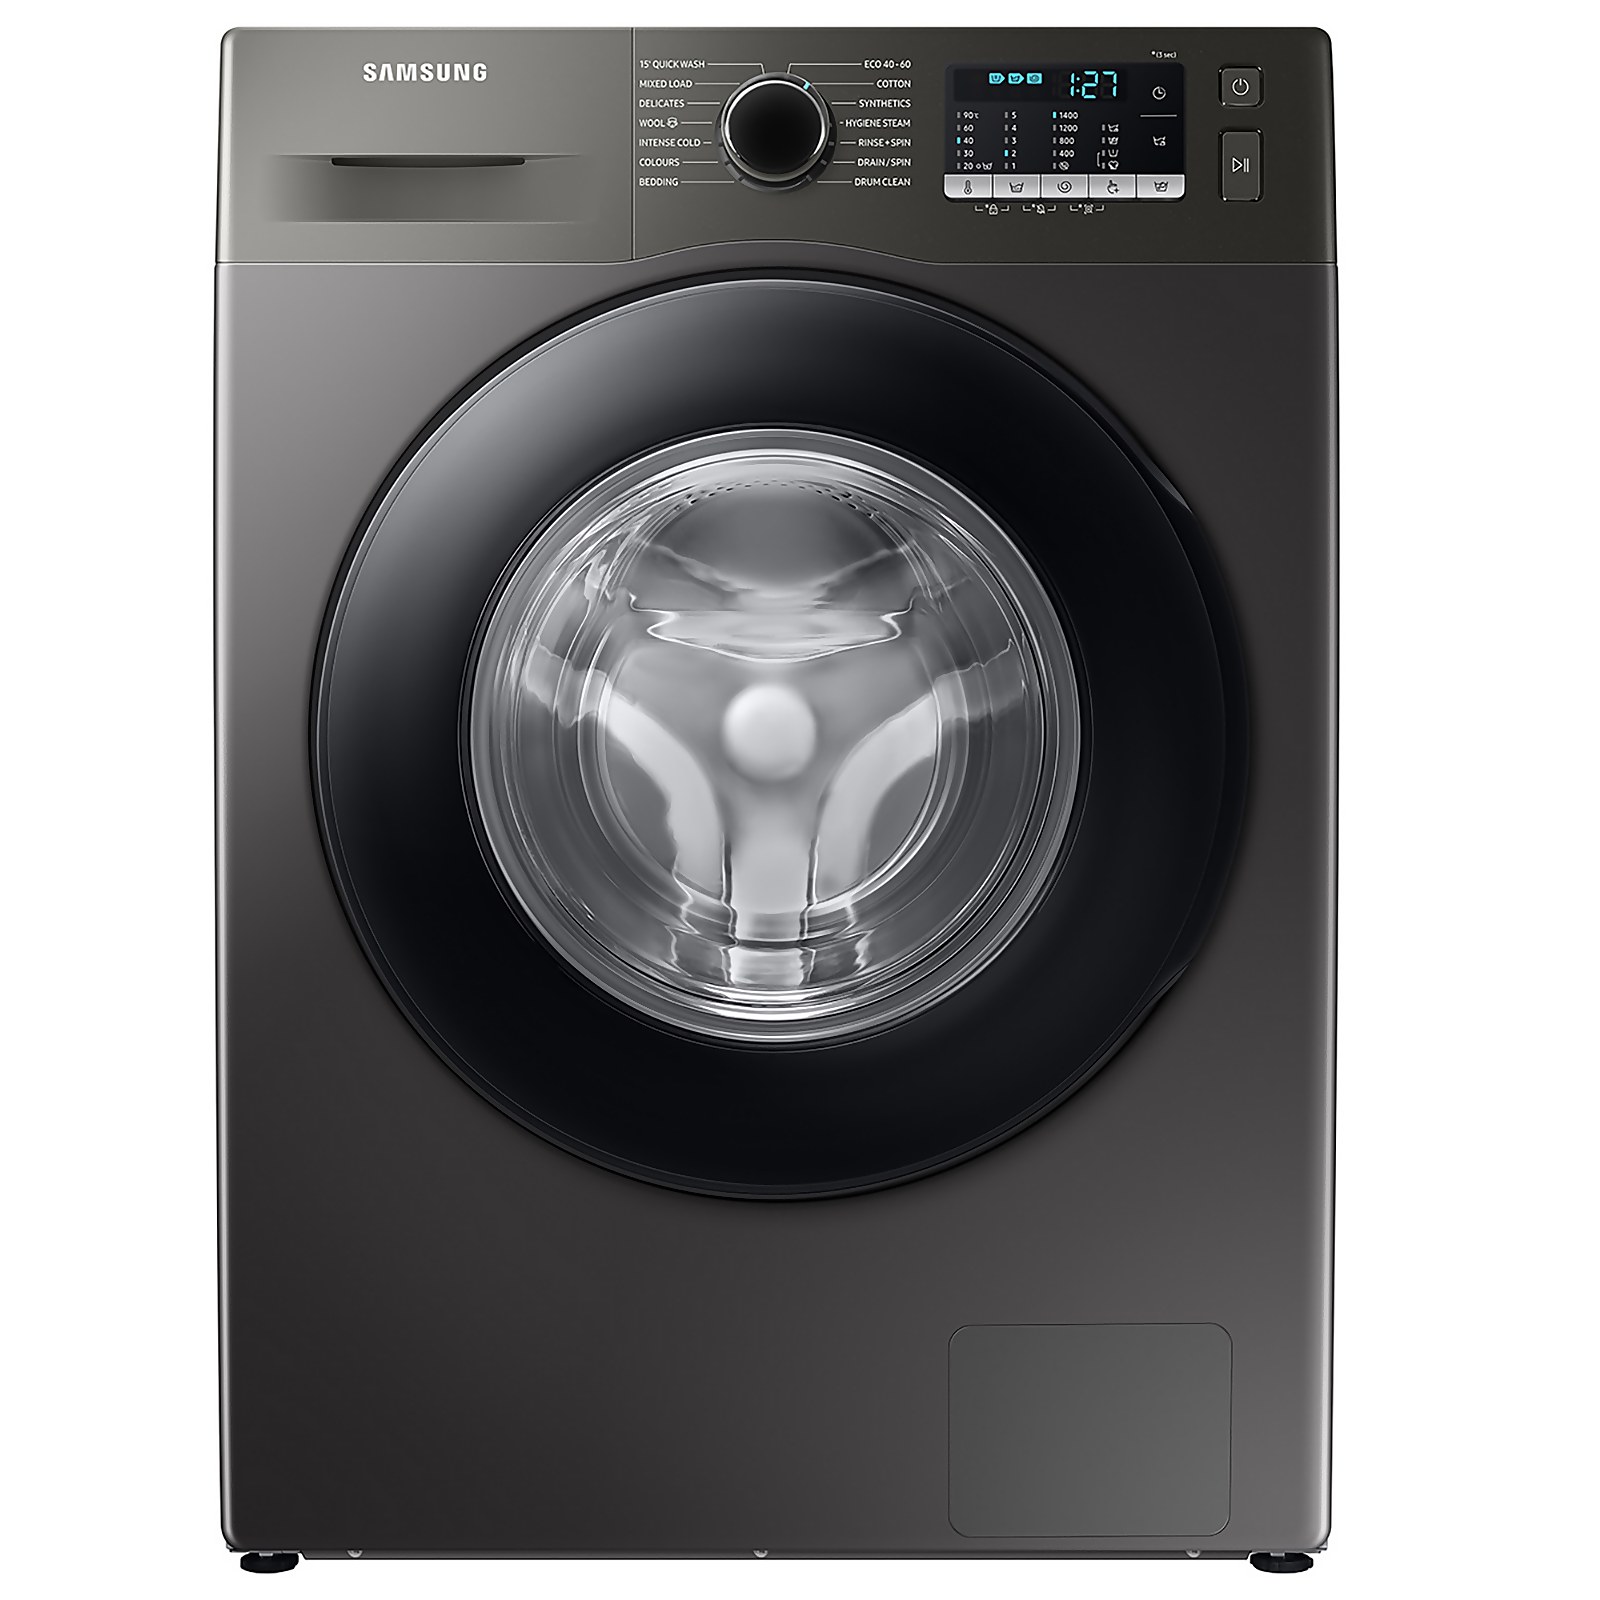 Samsung Series 5 ecobubble™ WW90TA046AX 9Kg Washing Machine with 1400 rpm - Graphite - A Rated